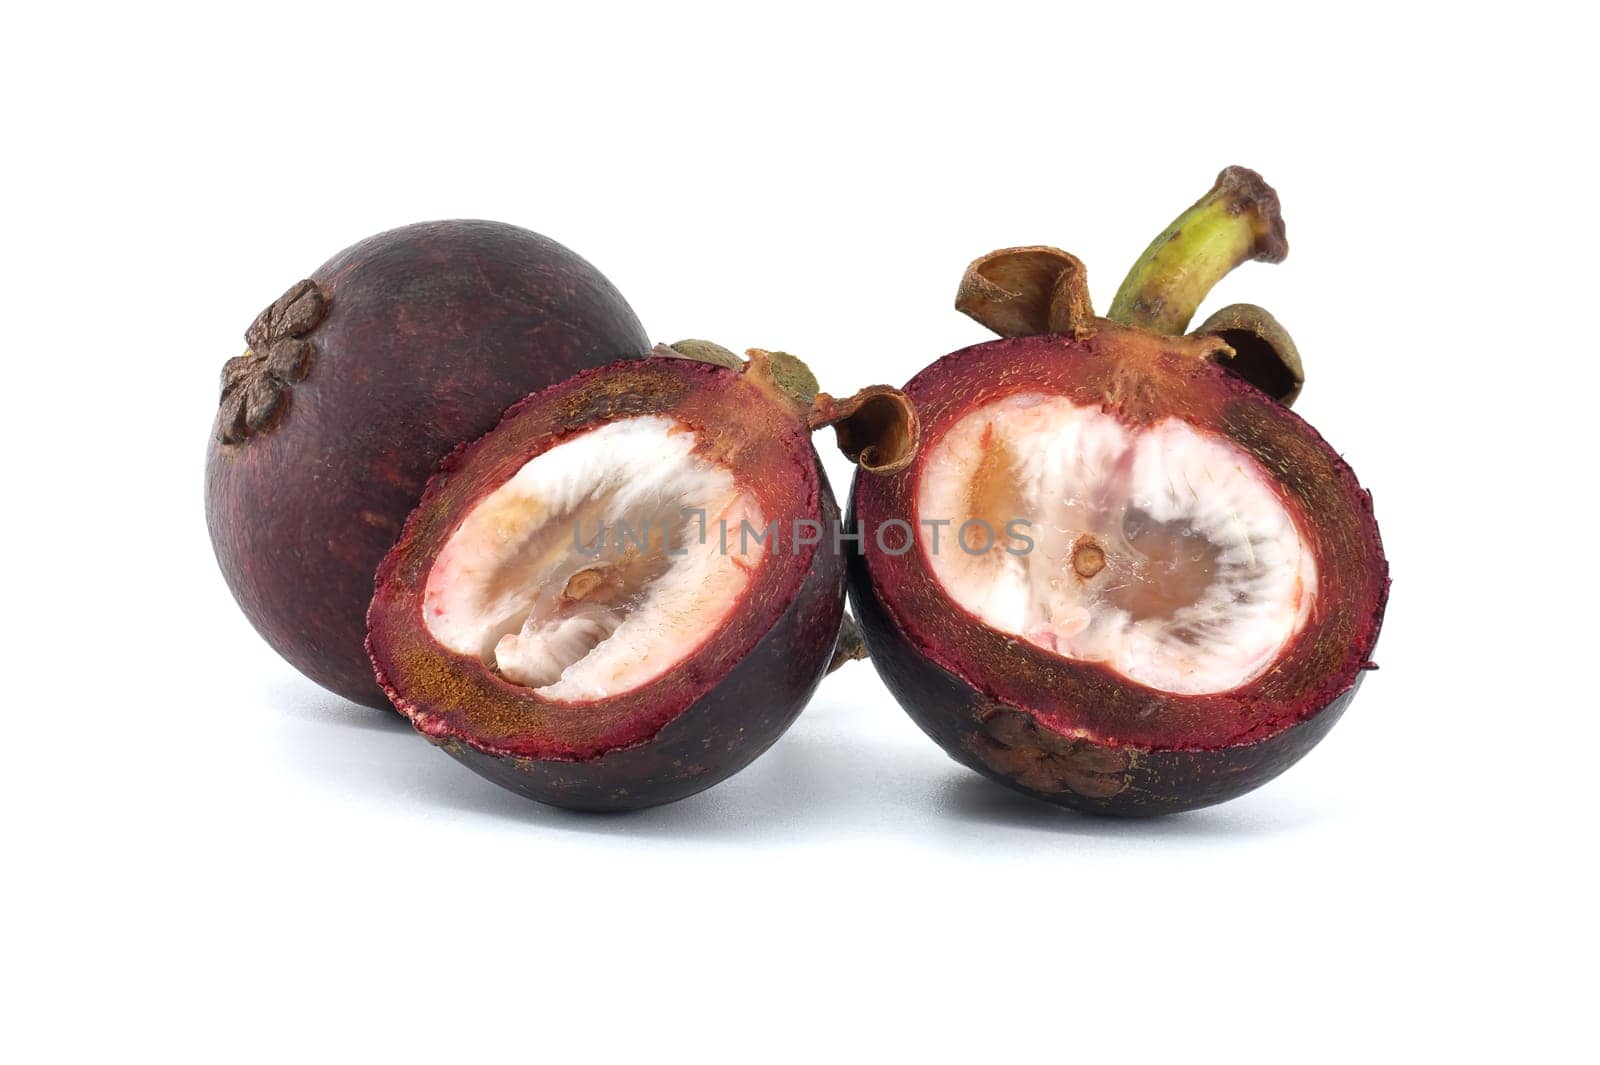 Whole and halved mangosteen fruits display their white inner flesh, speckled with dark purple spots and featuring two discernible black seeds, set against a white background